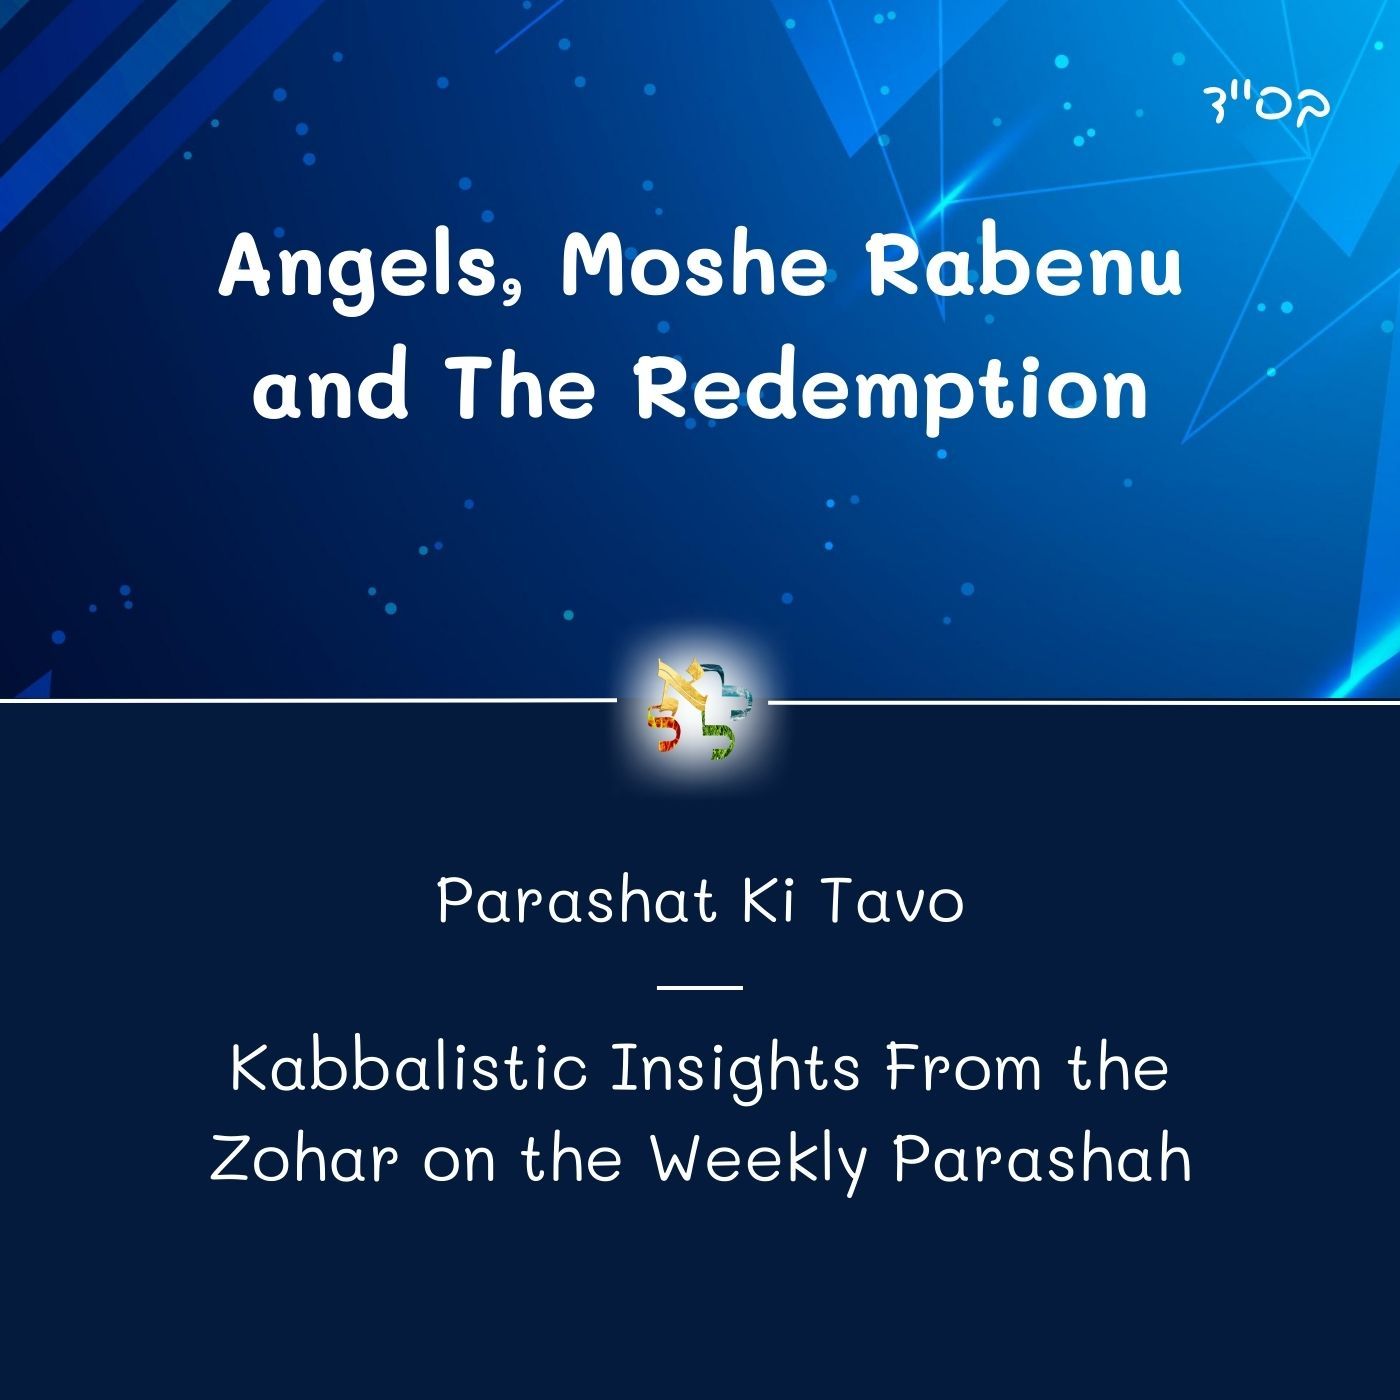 Angels, Moshe Rabenu and The Redemption - Kabbalistic Inspiration on the Parasha